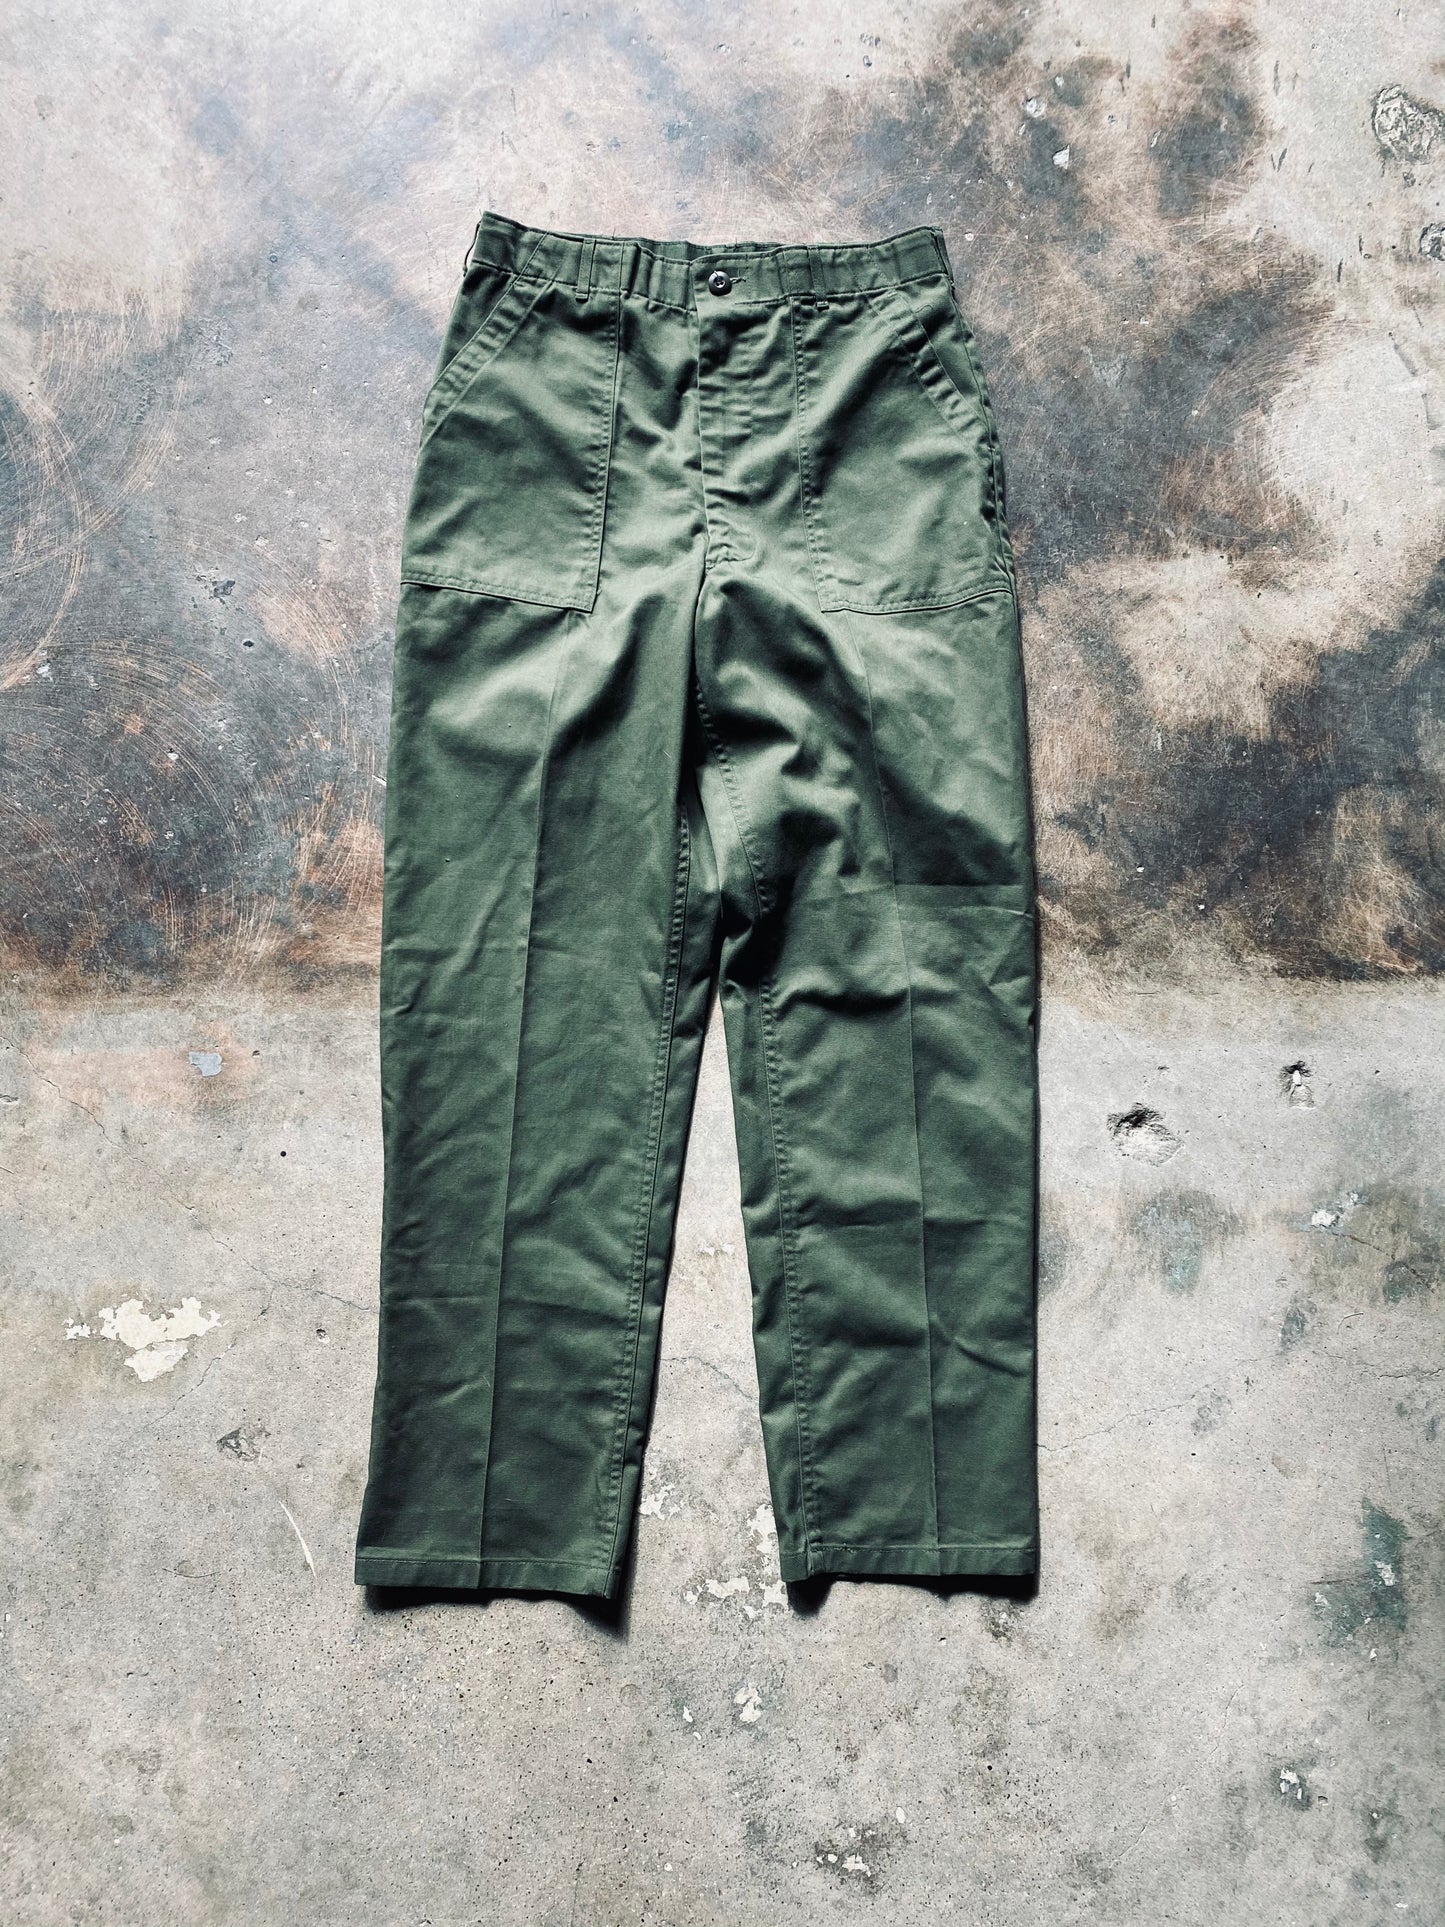 1982 US Army Utility Trouser